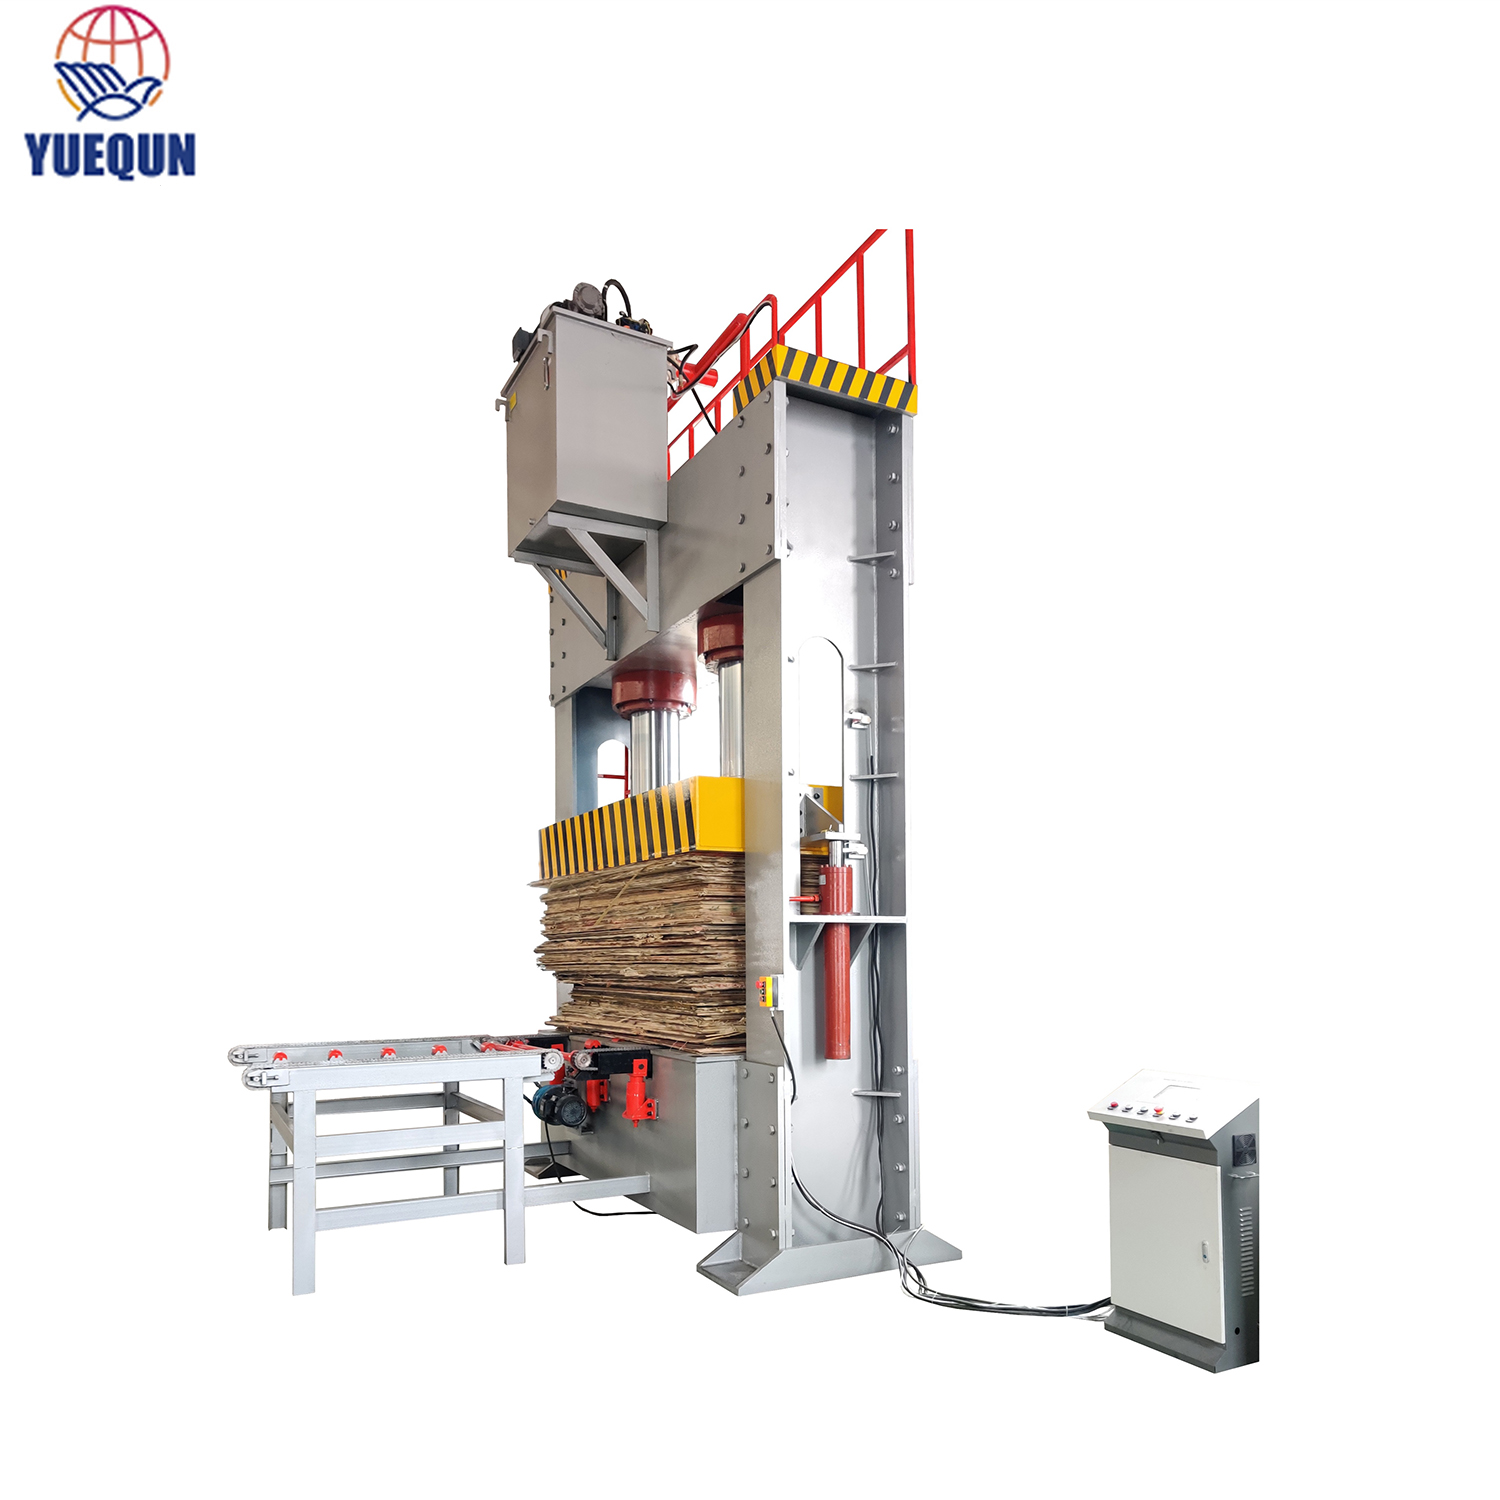 cold press machine for plywood